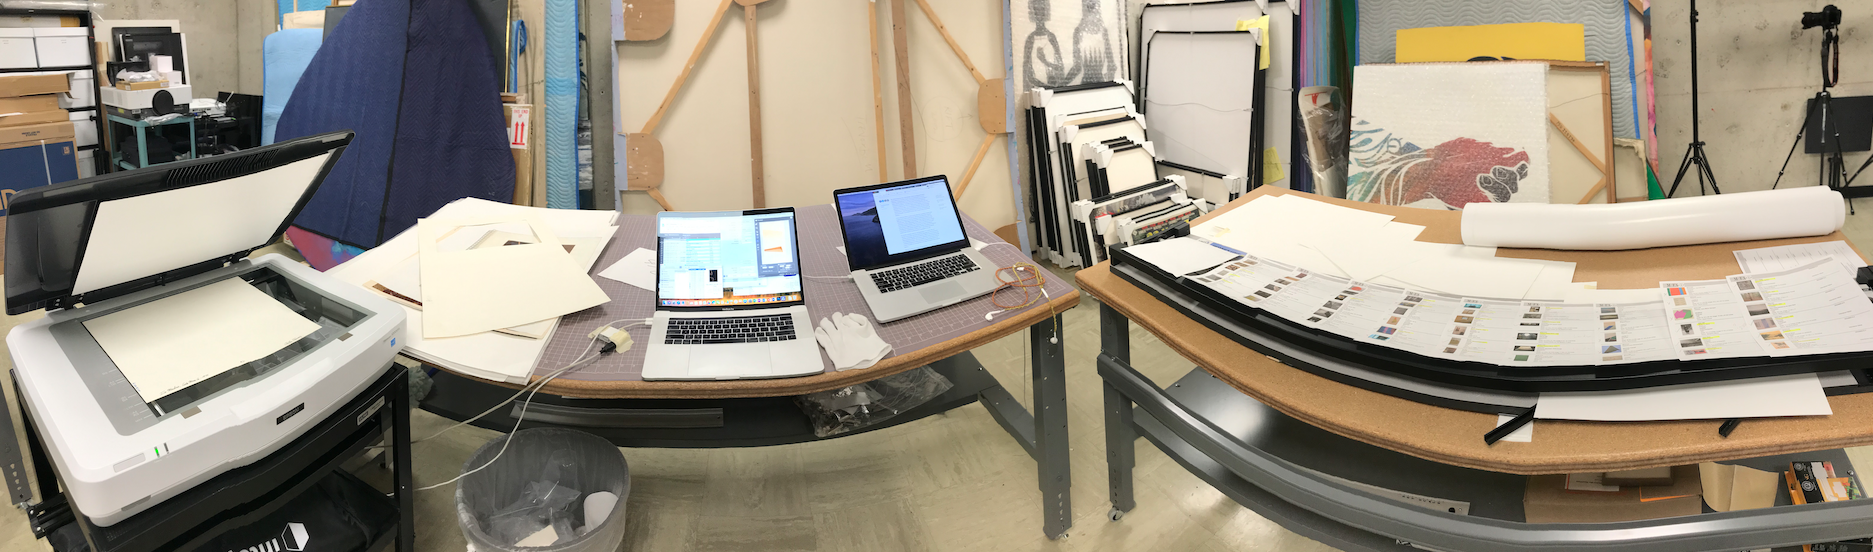 Work station for scanning Permanent Collections works.